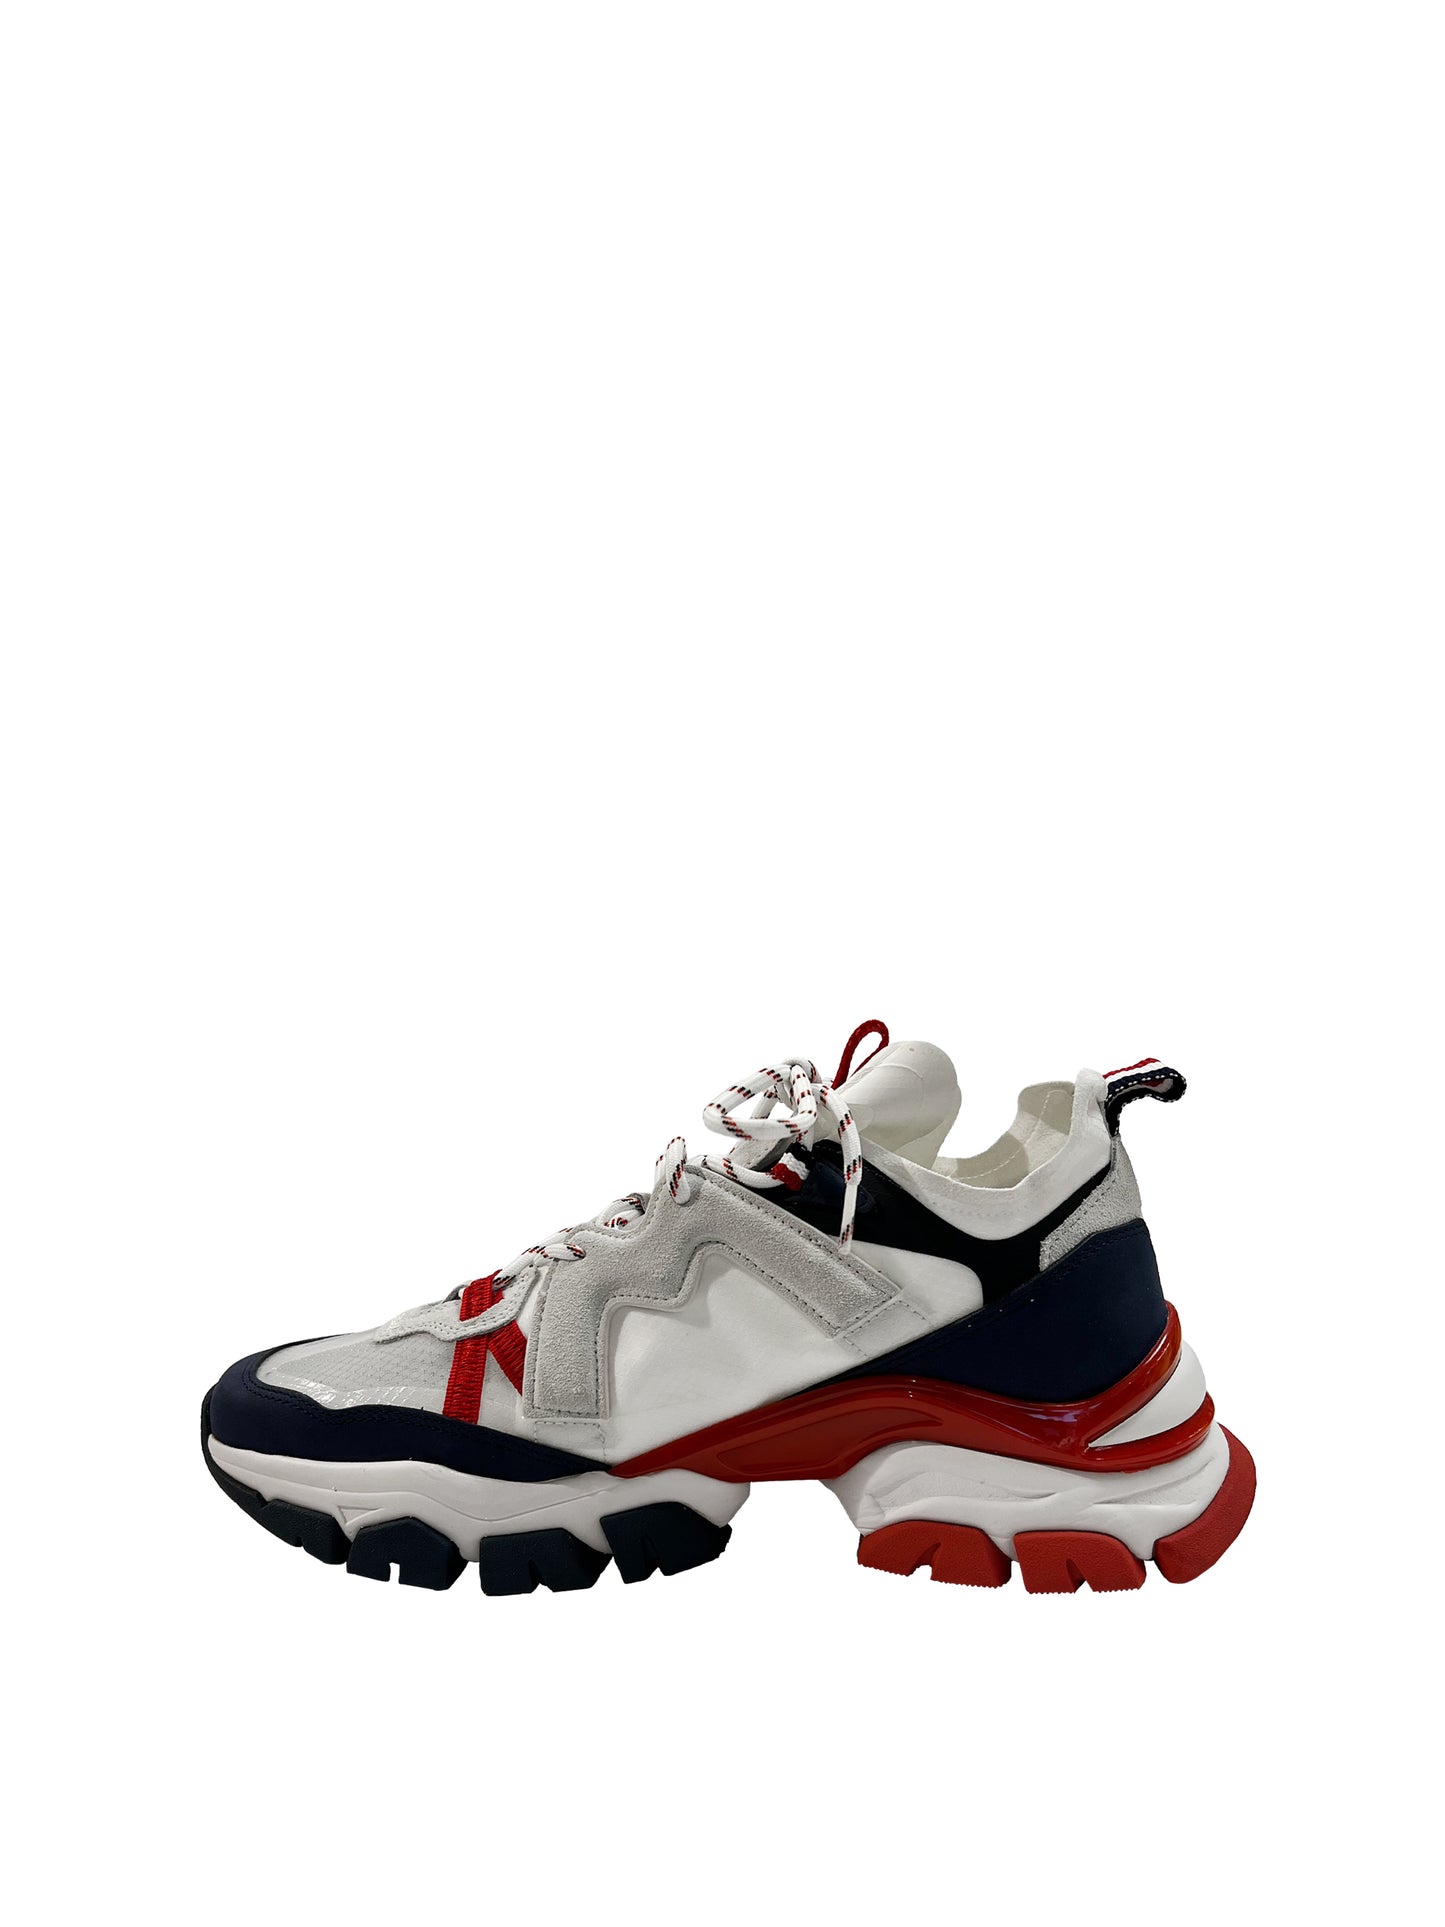 Moncler Sneaker Leave No Trance Blau/Weiss/Rot